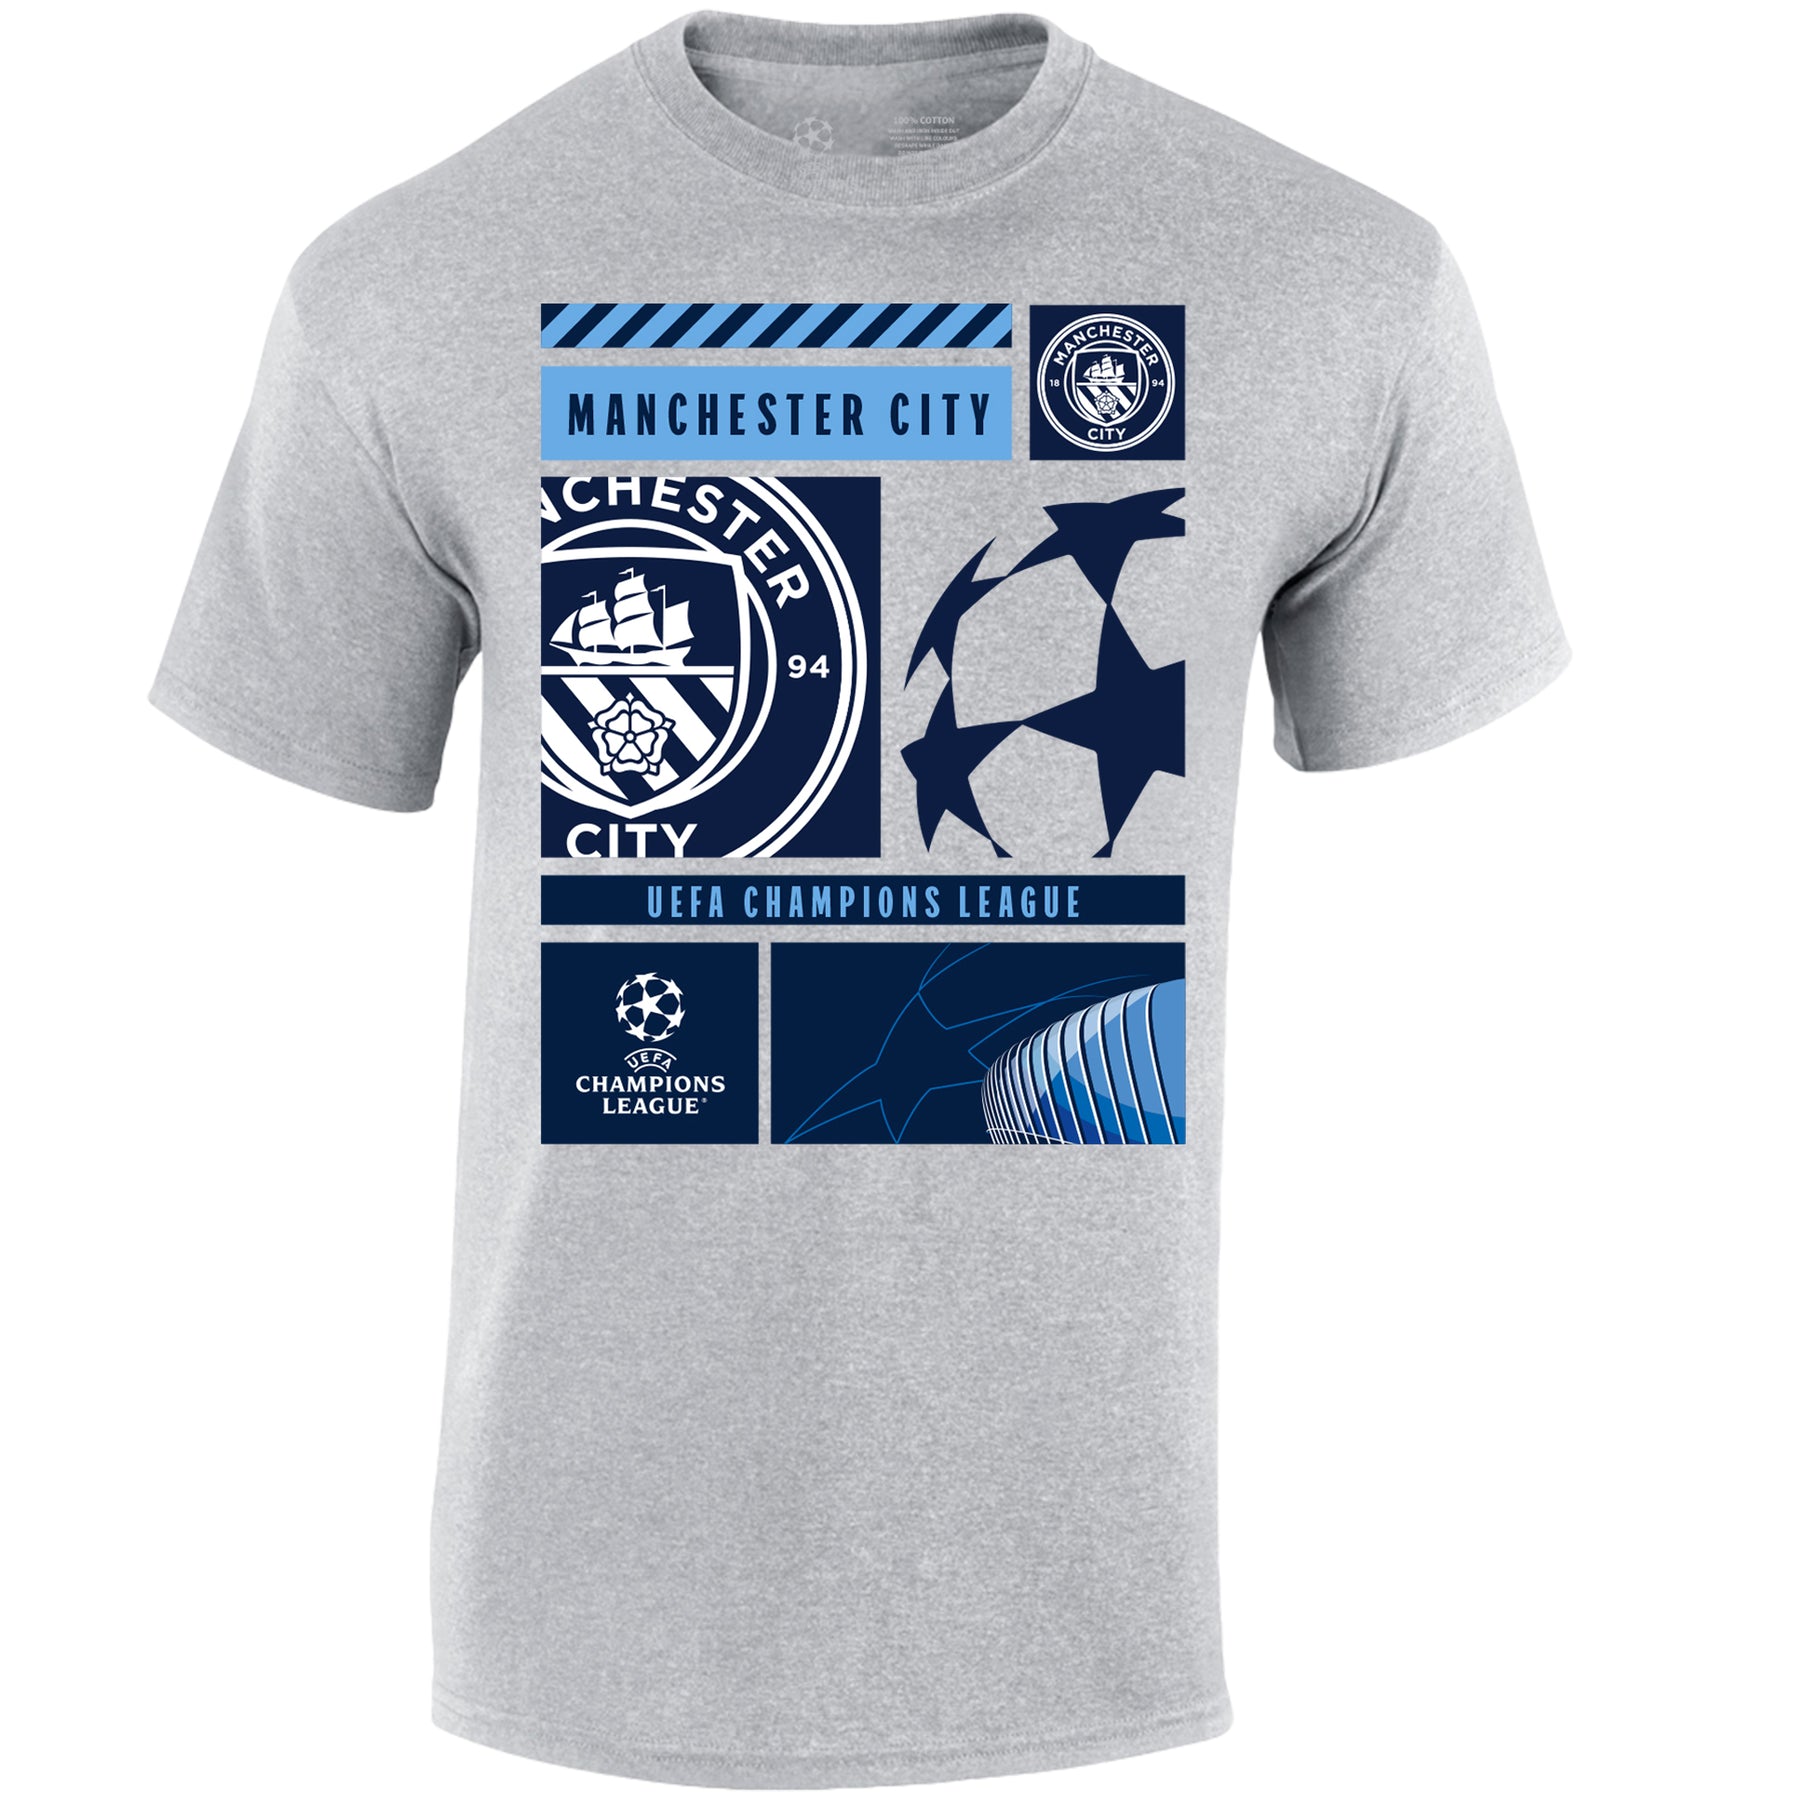 Champions League Manchester City Collage T-Shirt Grey